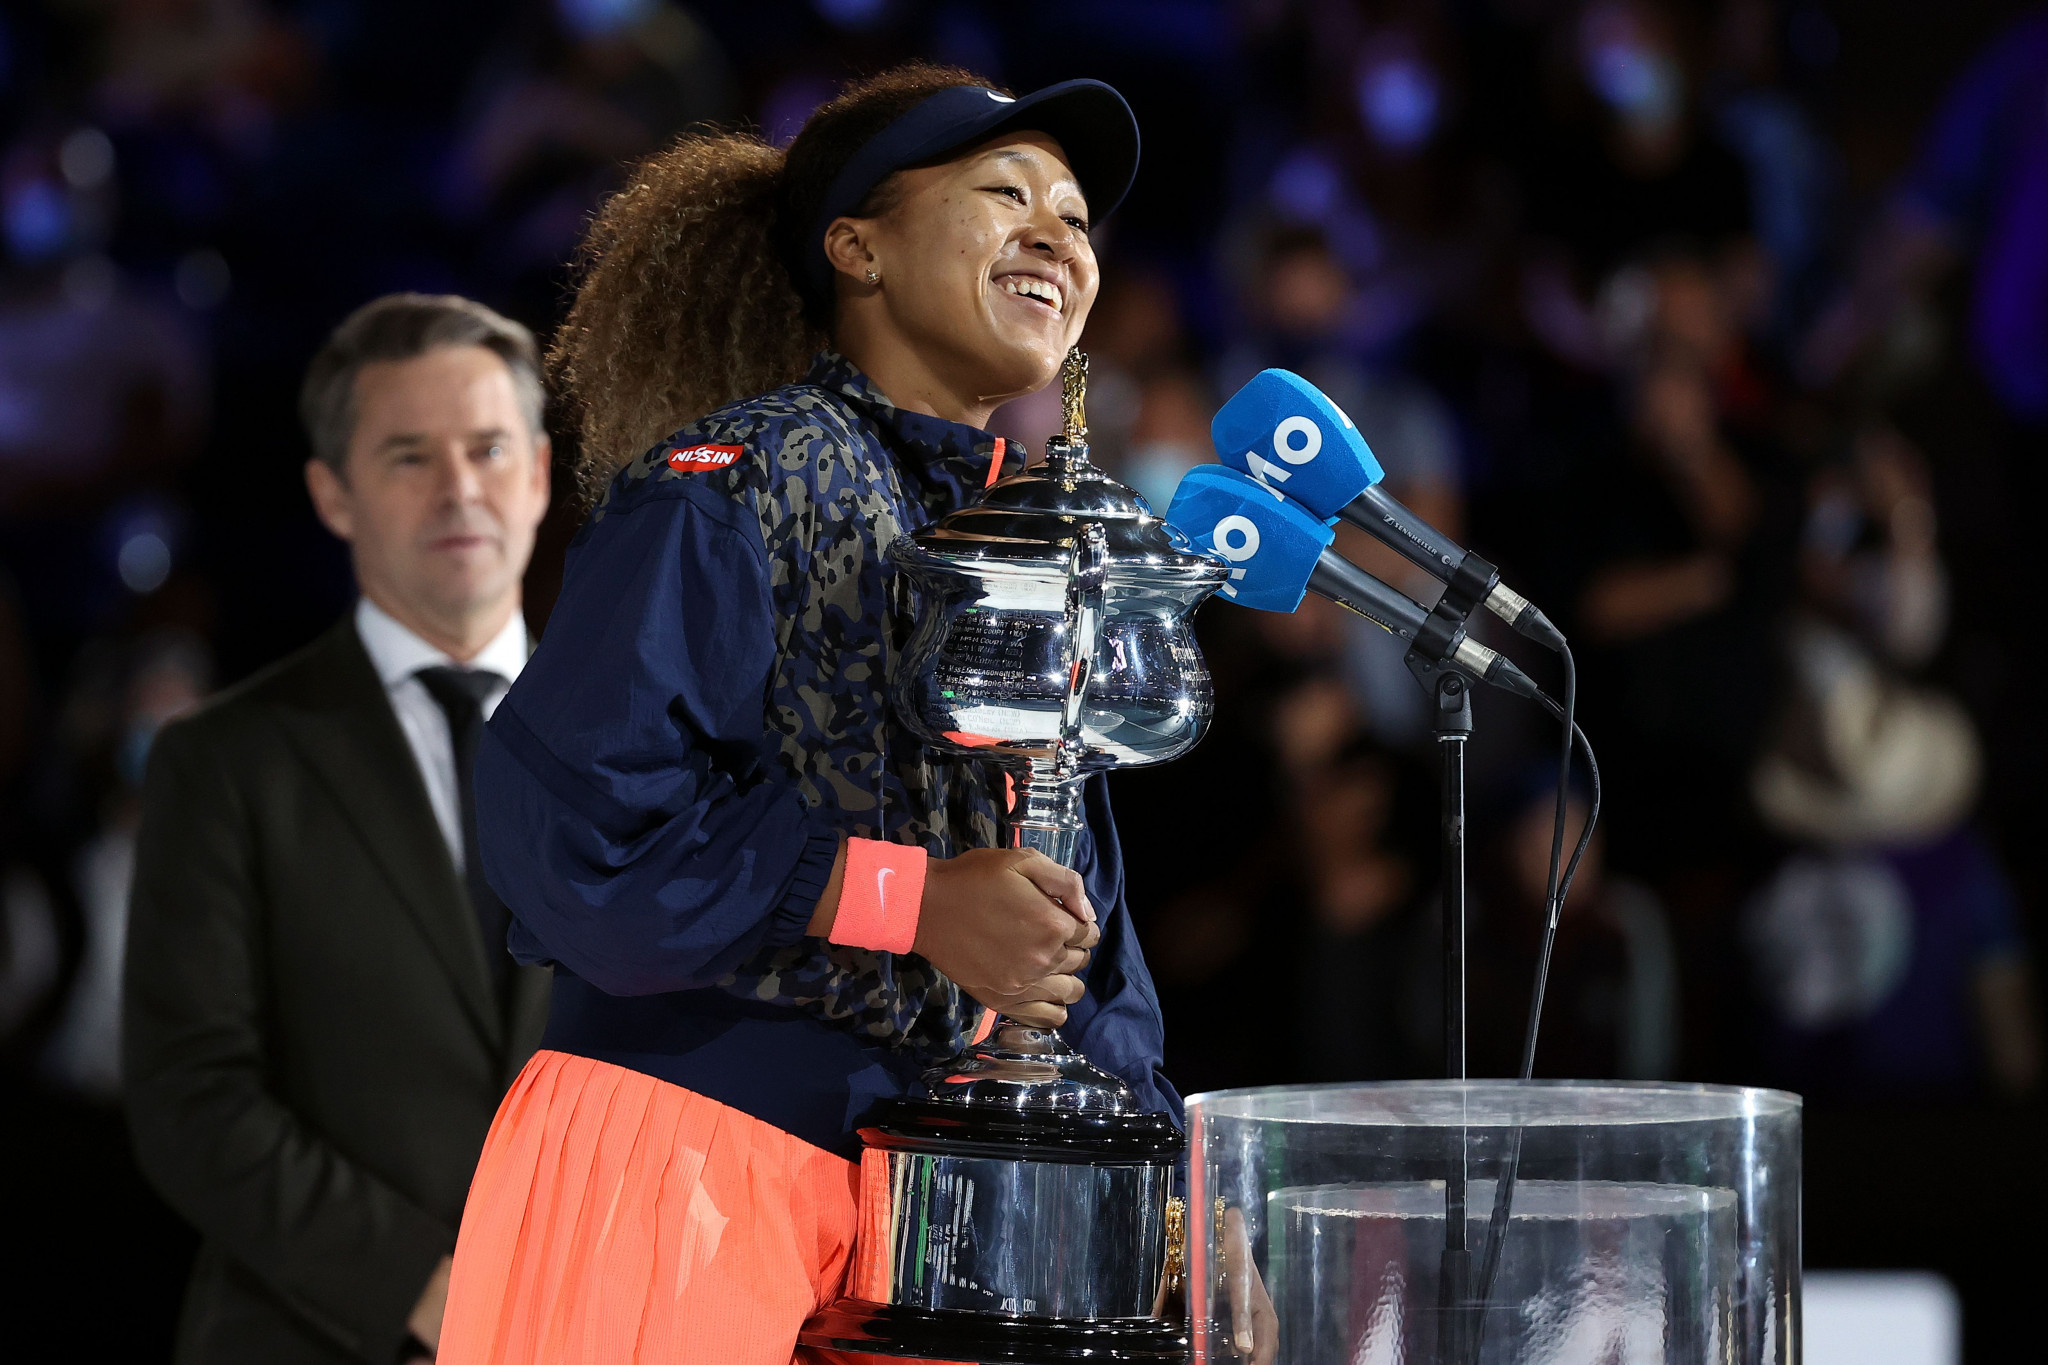 Naomi Osaka said she was thankful for the crowd after winning the US Open behind closed doors ©Getty Images